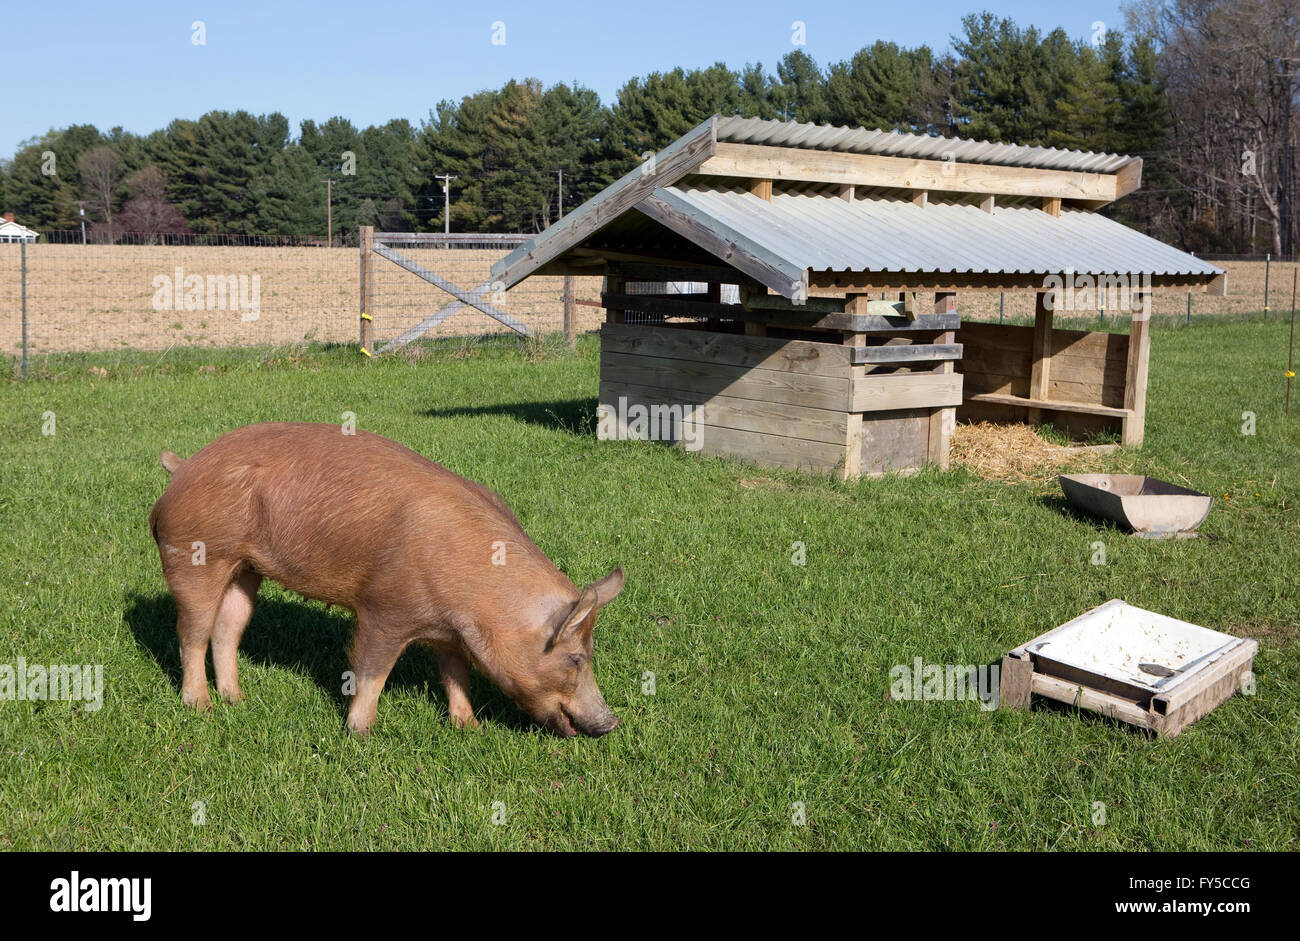 An organically raised free range Tamworth pig grazes on grass on a small farm in Maryland. Stock Photo